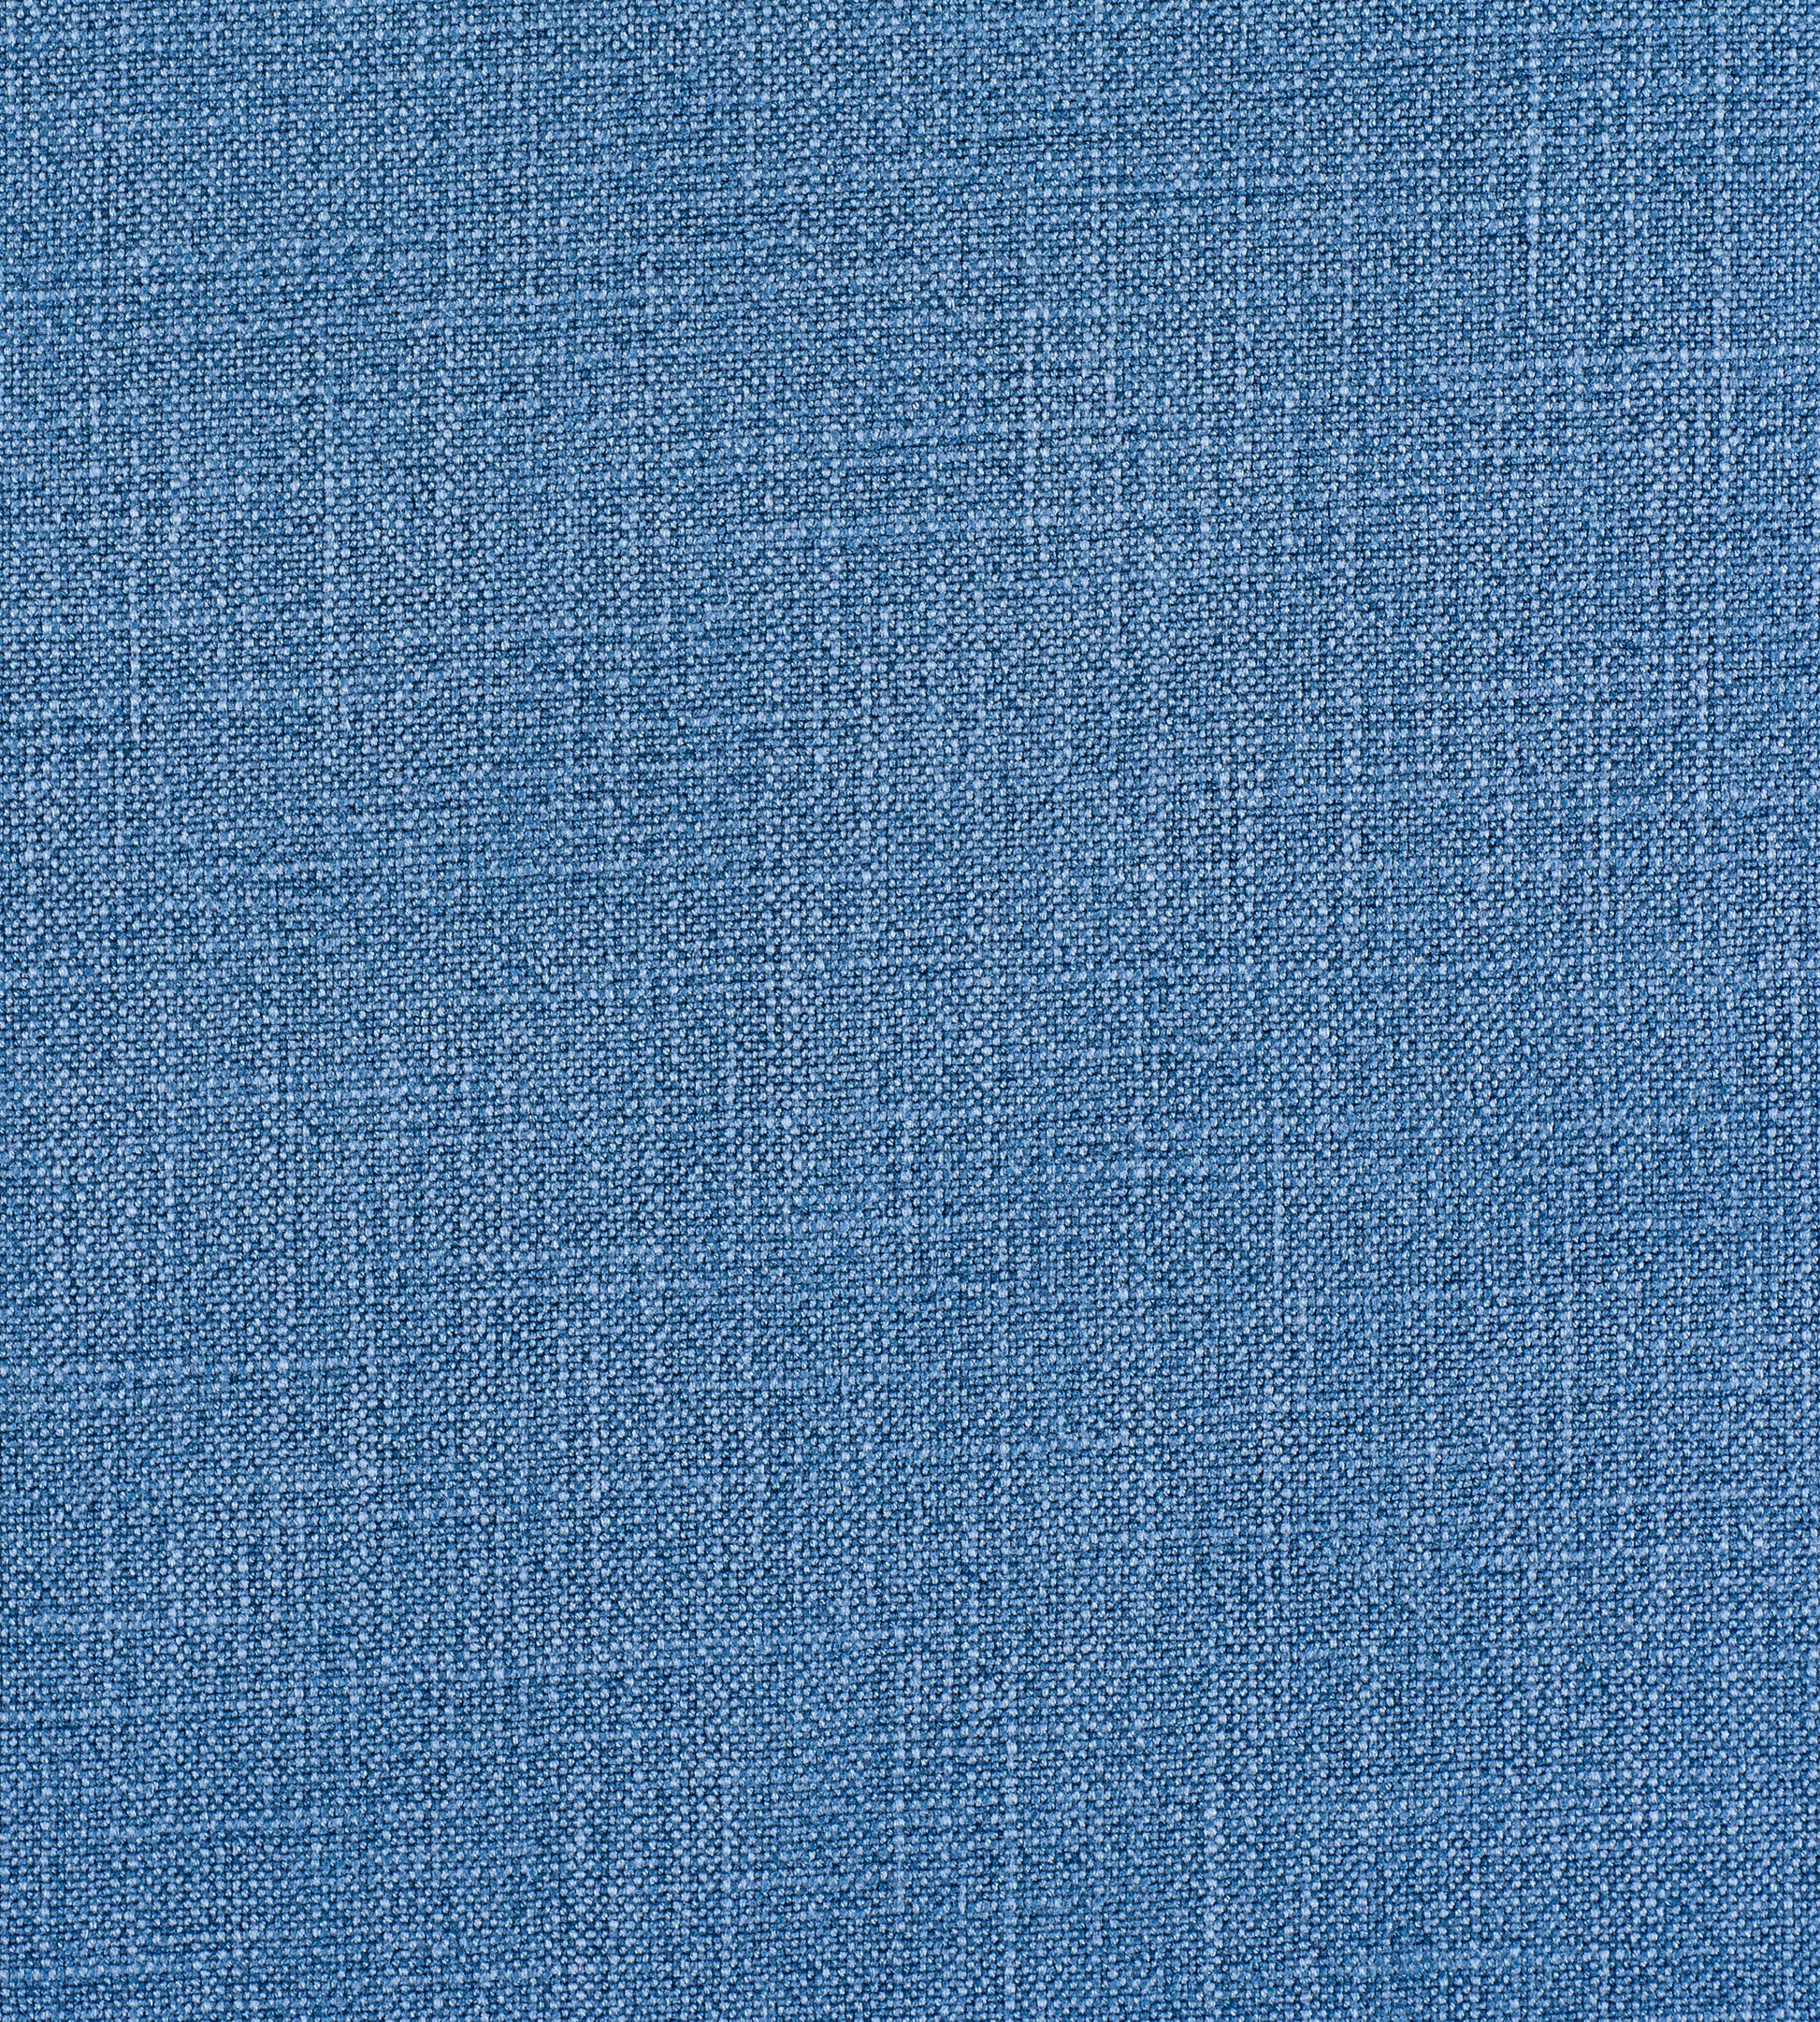 Purchase Old World Weavers Fabric Product H8 0016406T, Stonewash Lakeview 2